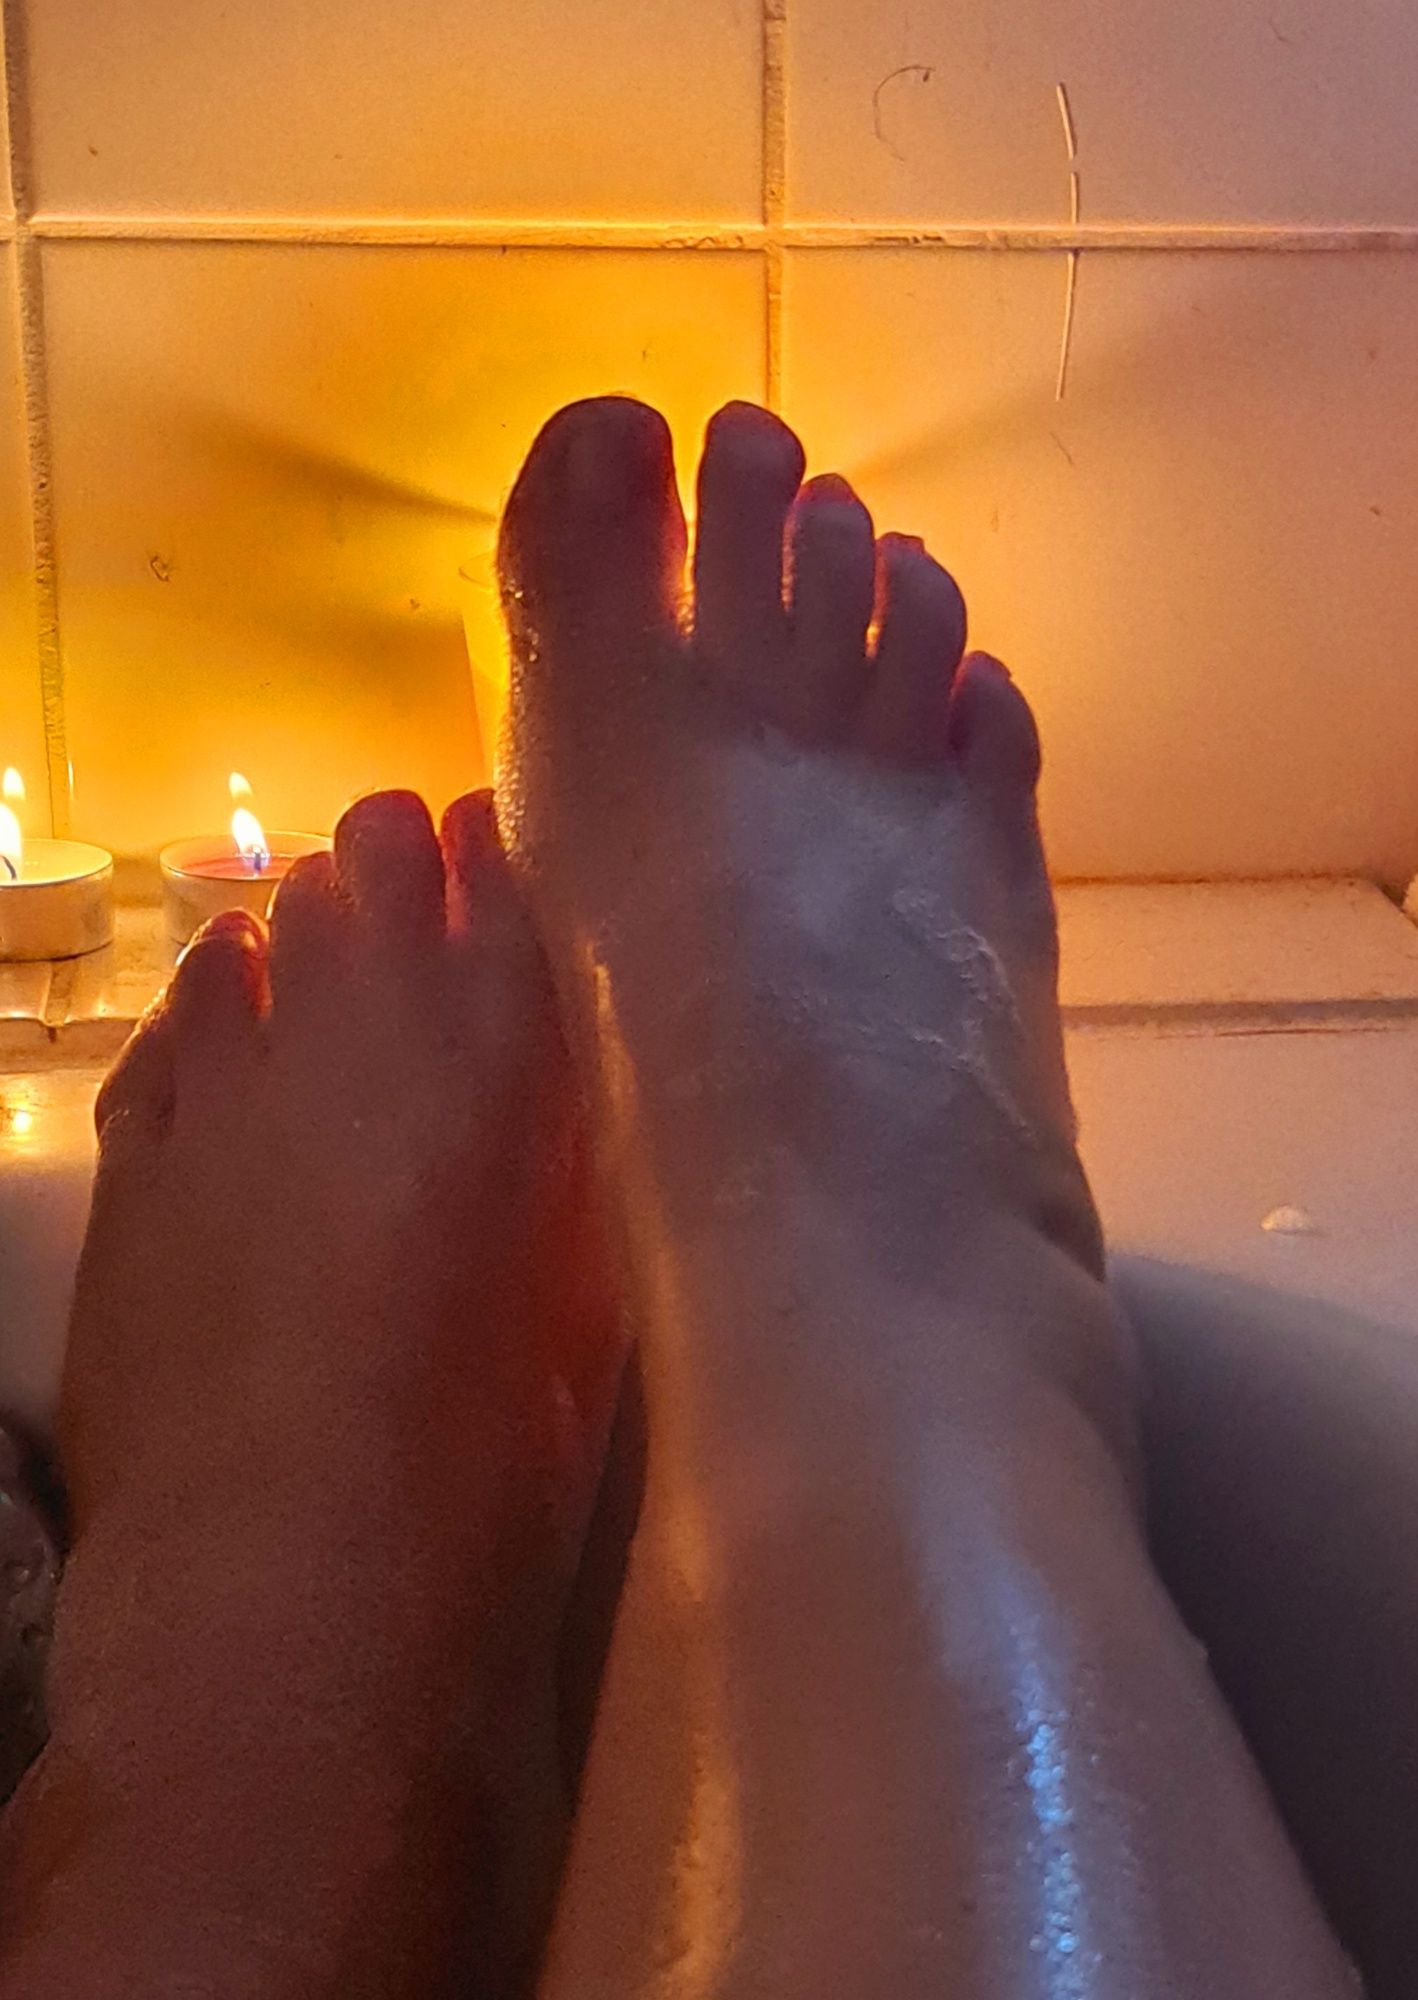 Foot and sextoy . Bathtime #5